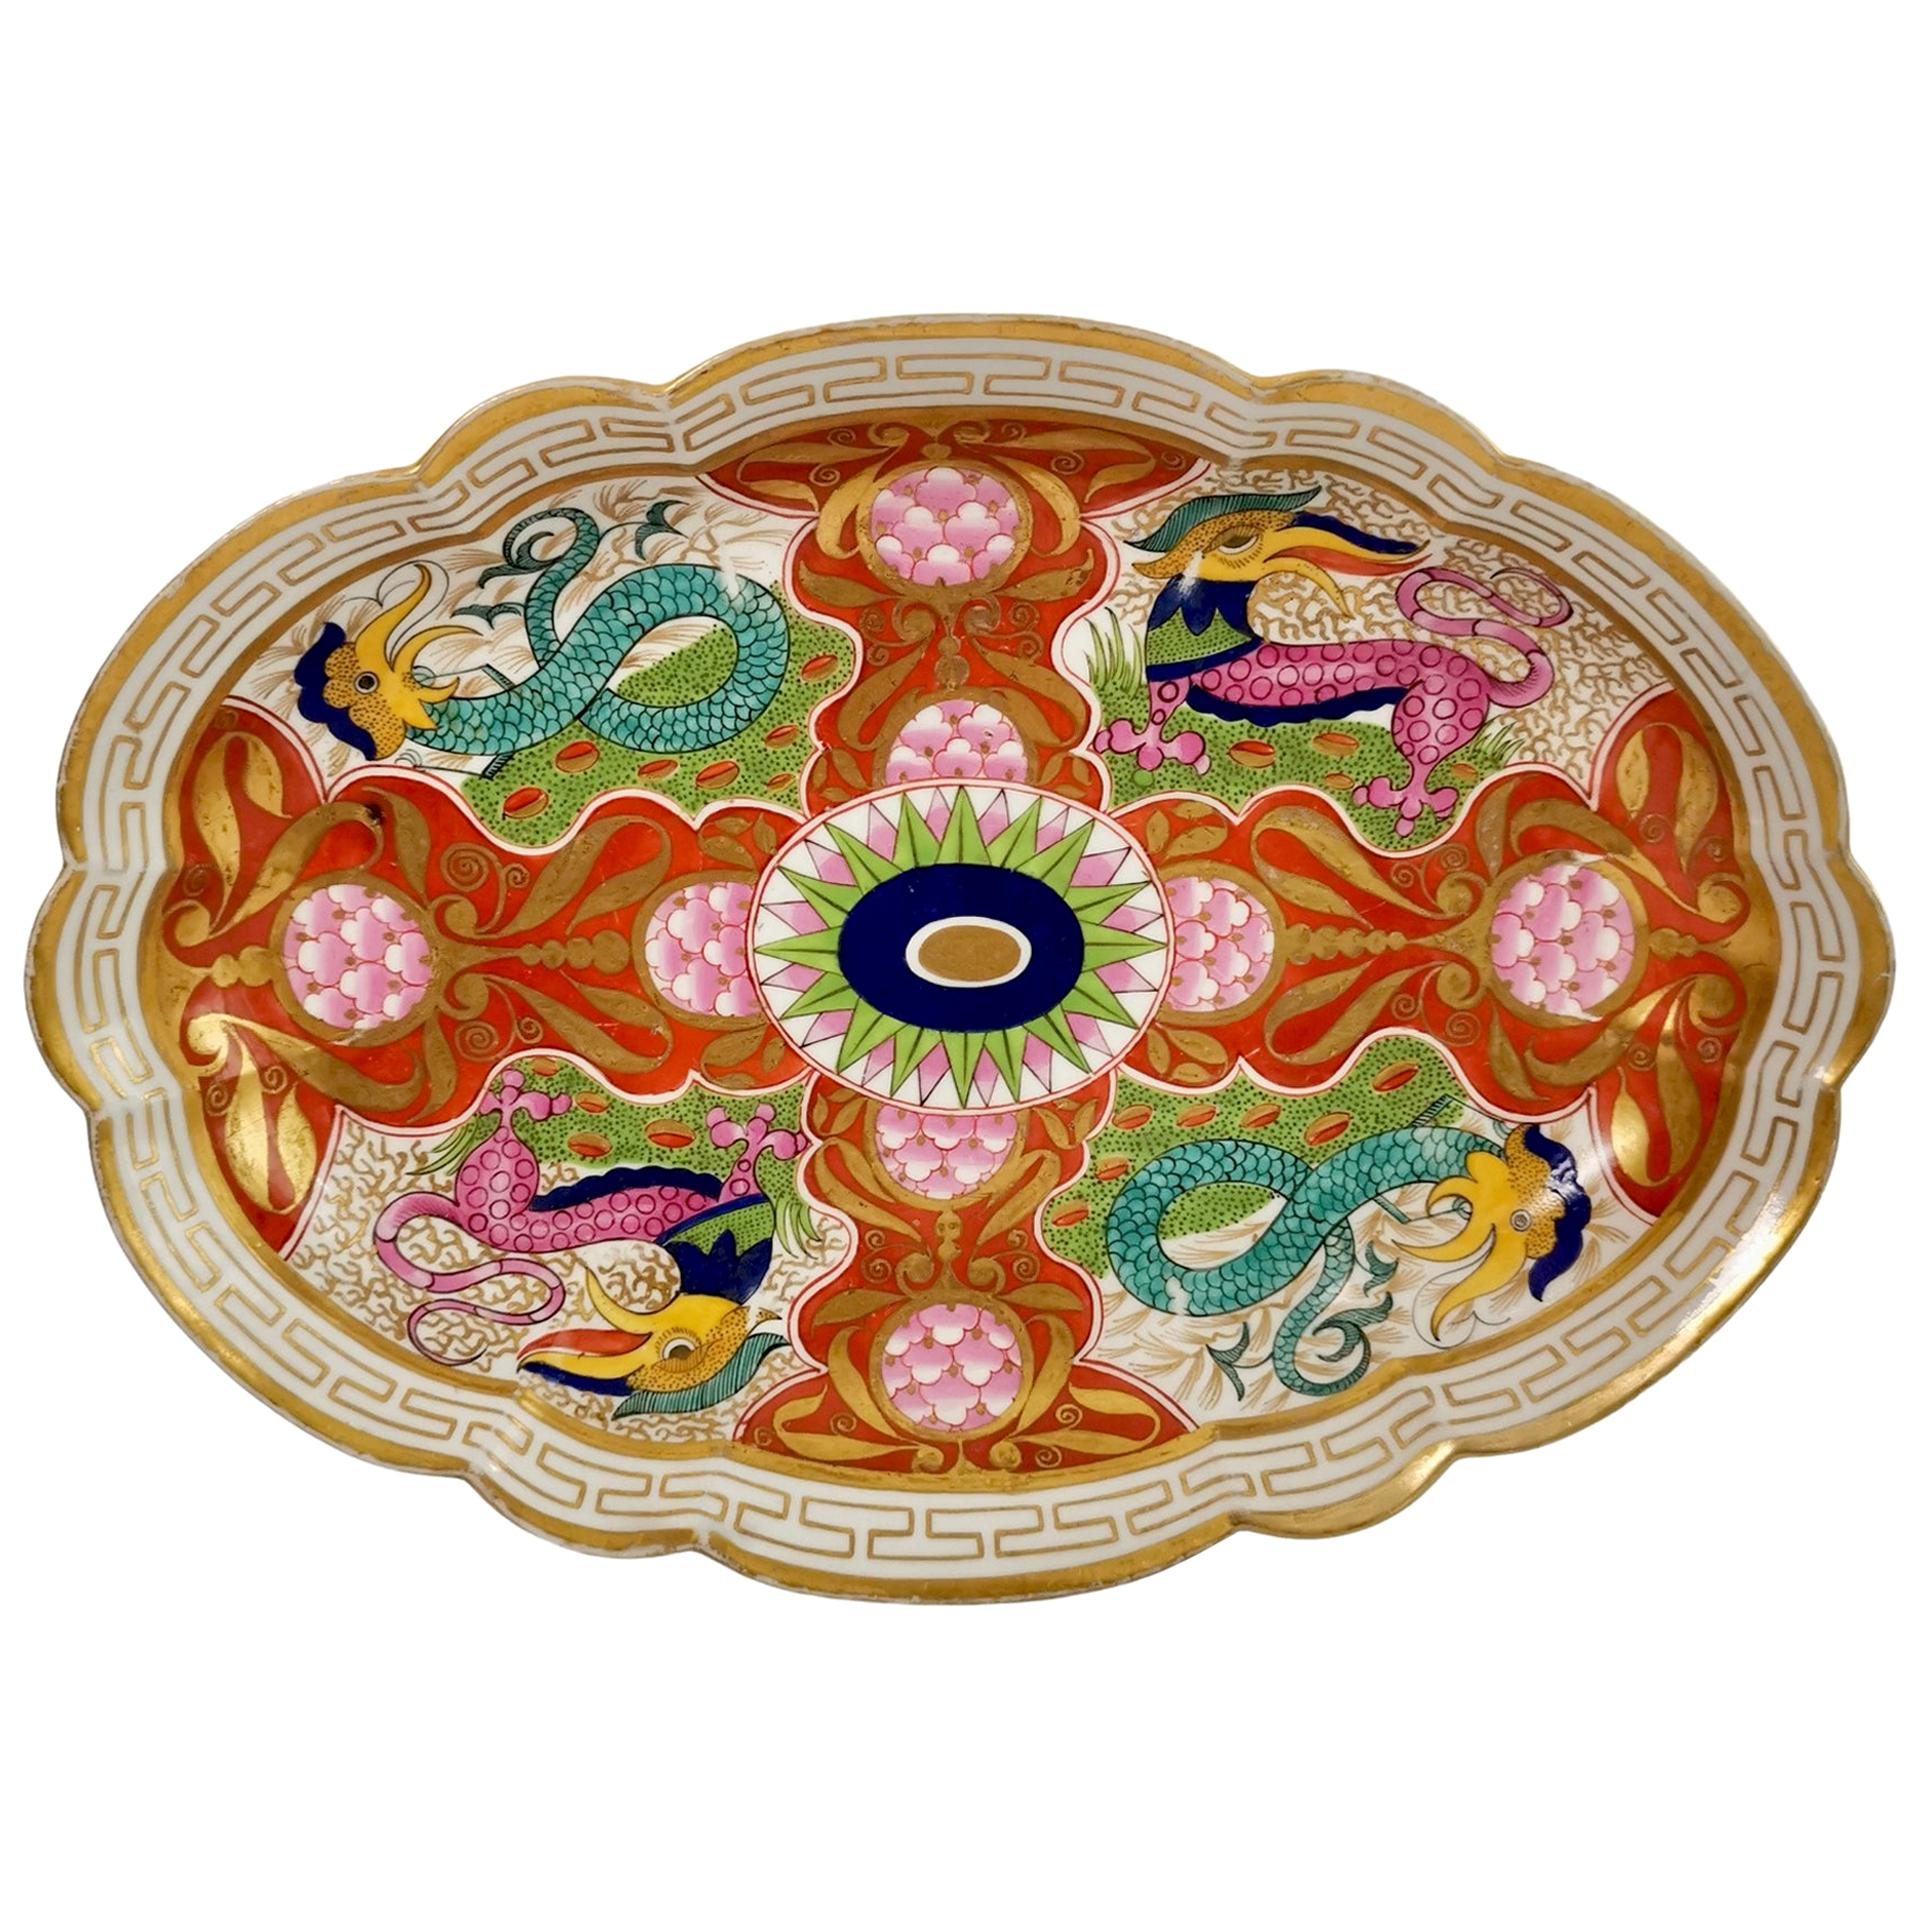 Barr Flight & Barr Oval Dish, Dragons in Compartments, Regency 1807-1813